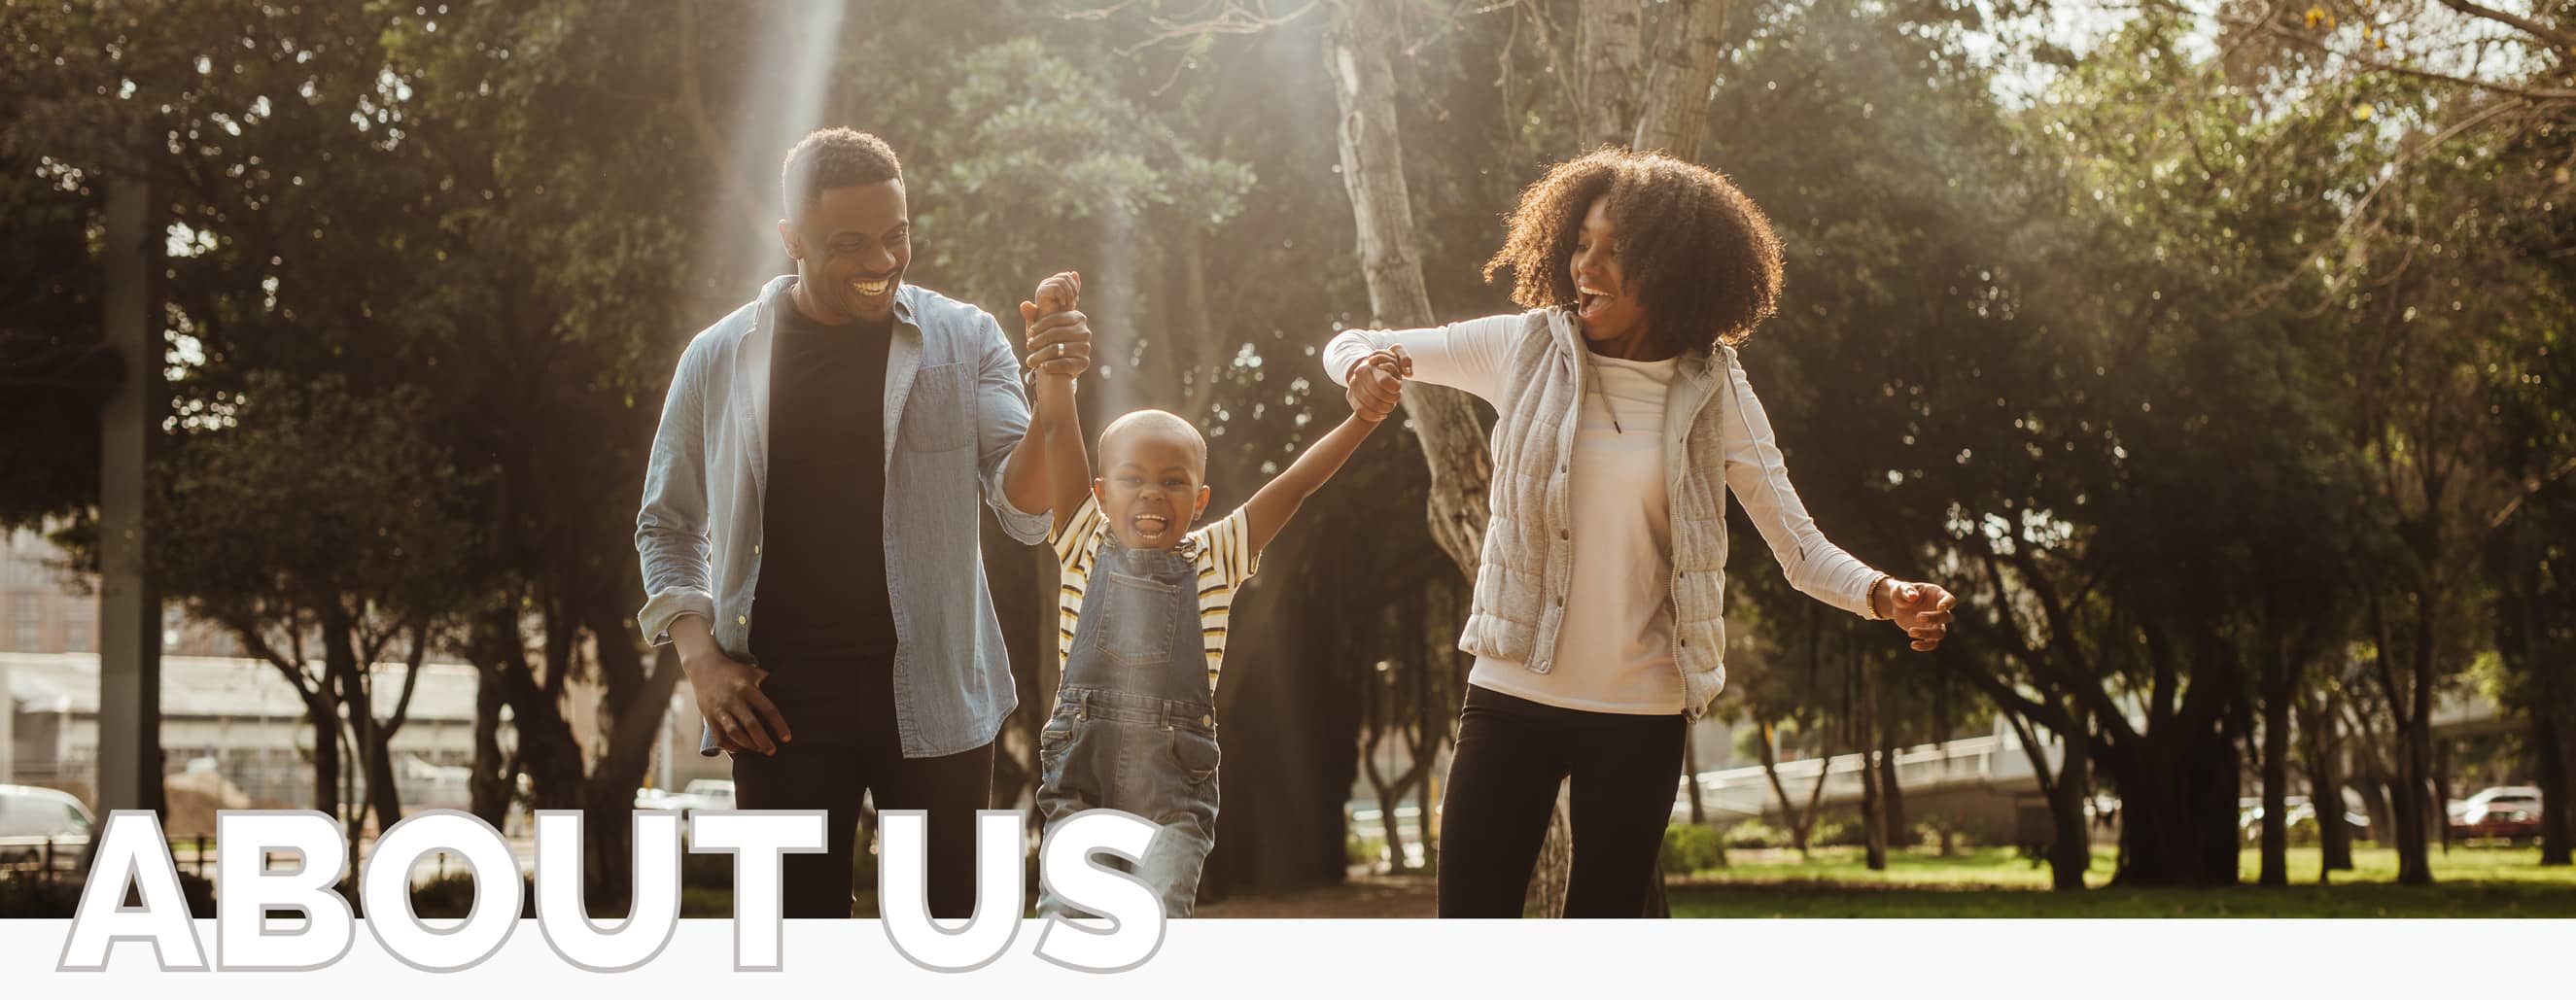 A young African American family, consisting of a young daughter, mother and father, outside laughing and playing together. The photo includes the words "About Us" in franklin tn